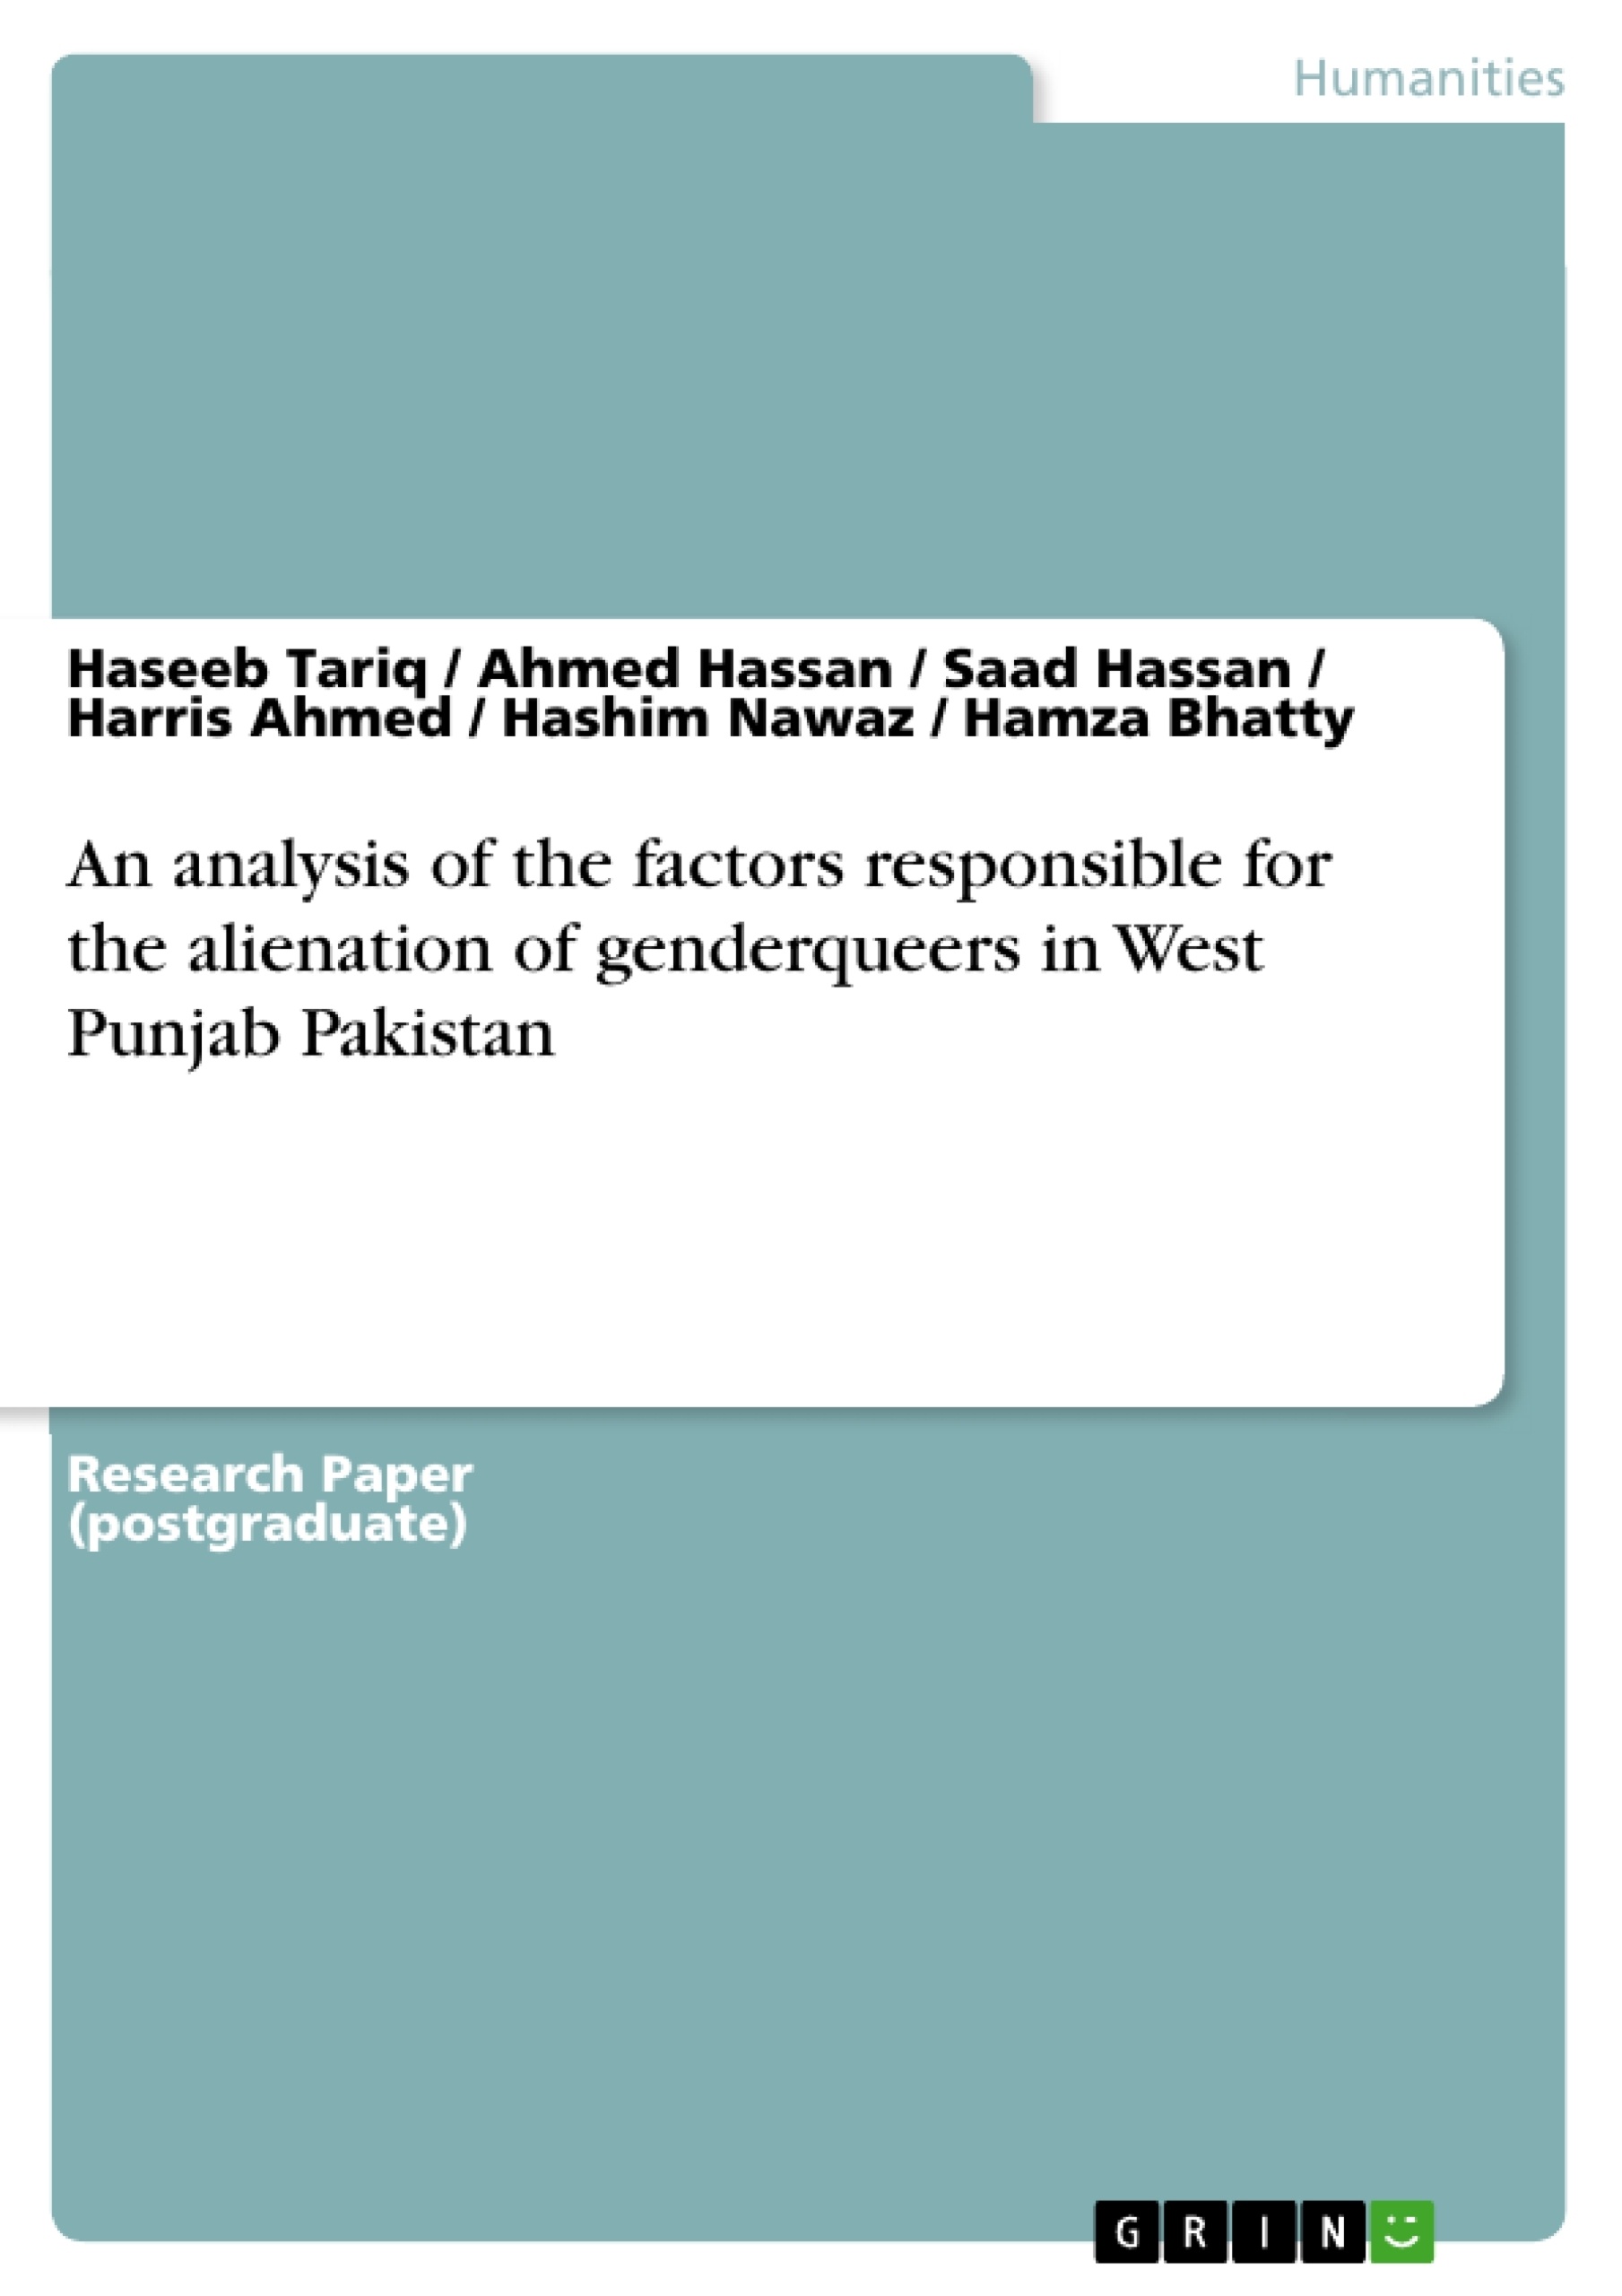 Título: An analysis of the factors responsible for the alienation of genderqueers in West Punjab Pakistan